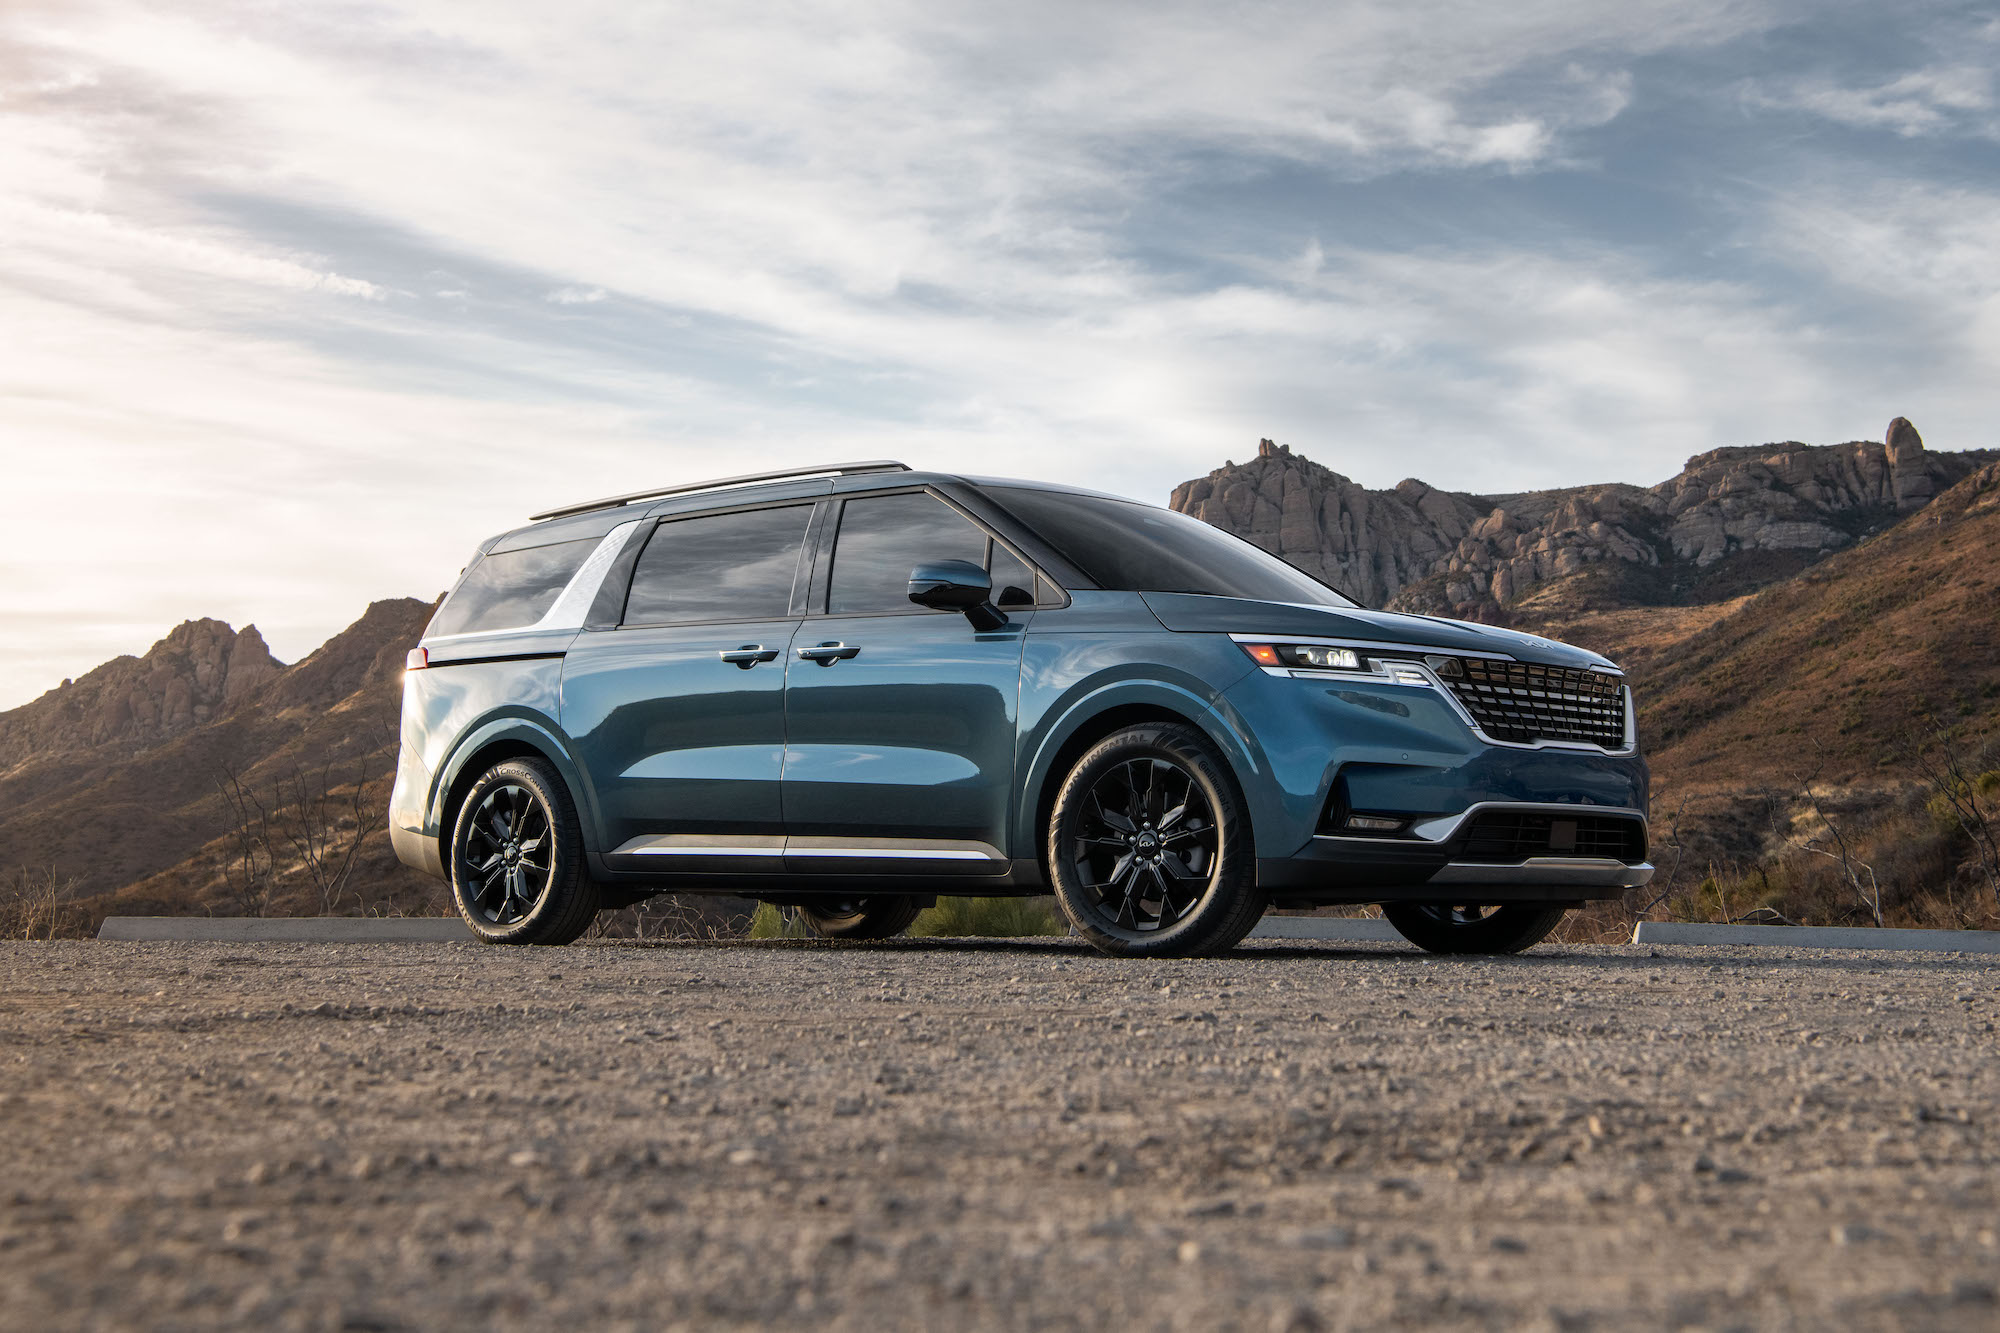 A blue 2022 Kia Carnival minivan parked on gravel in front of mountains on a partly cloudy day